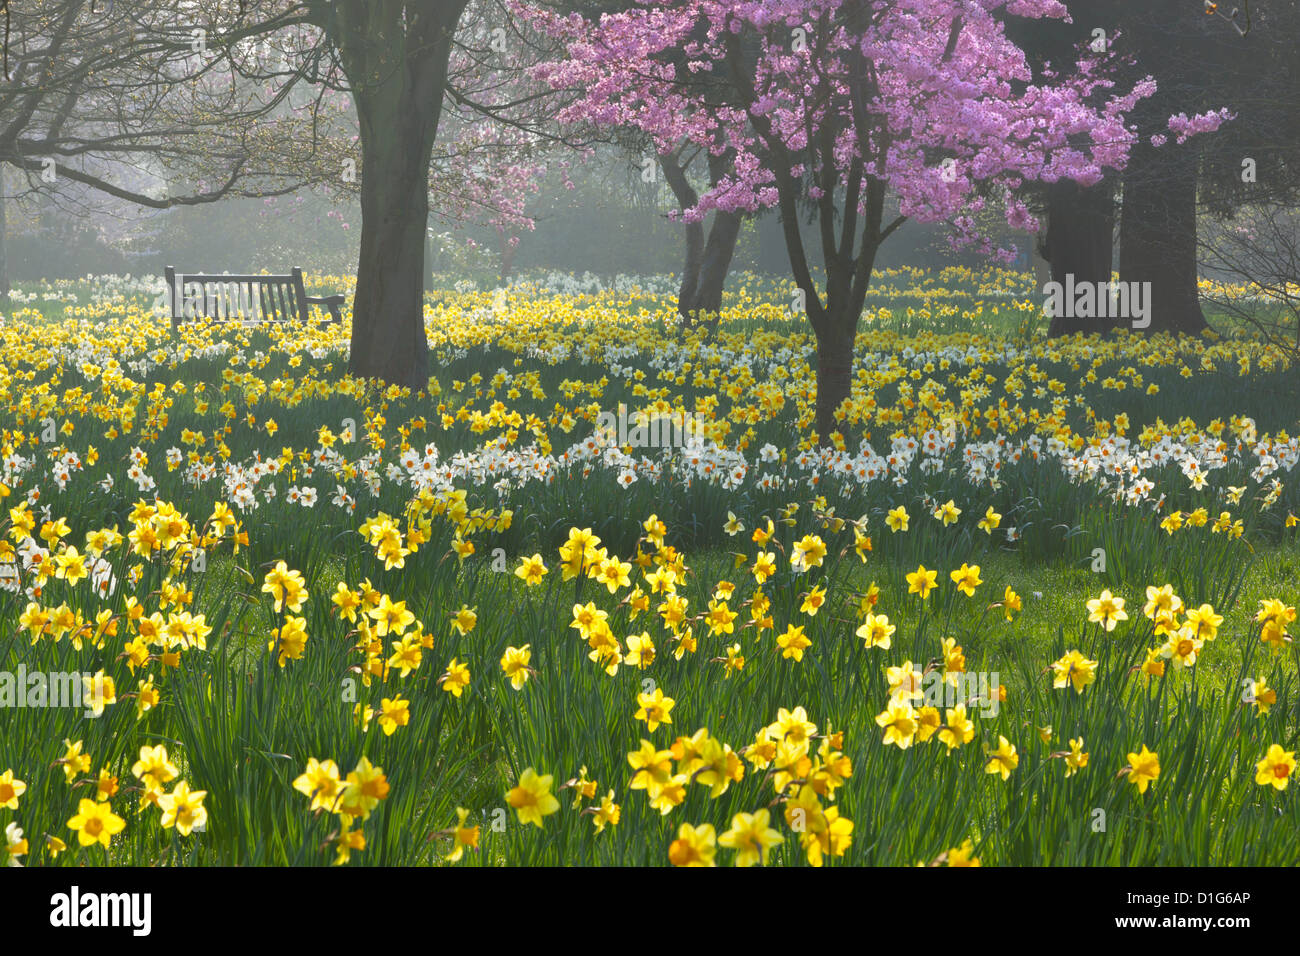 Daffodils and blossom in spring, Hampton, Greater London, England, United Kingdom, Europe Stock Photo